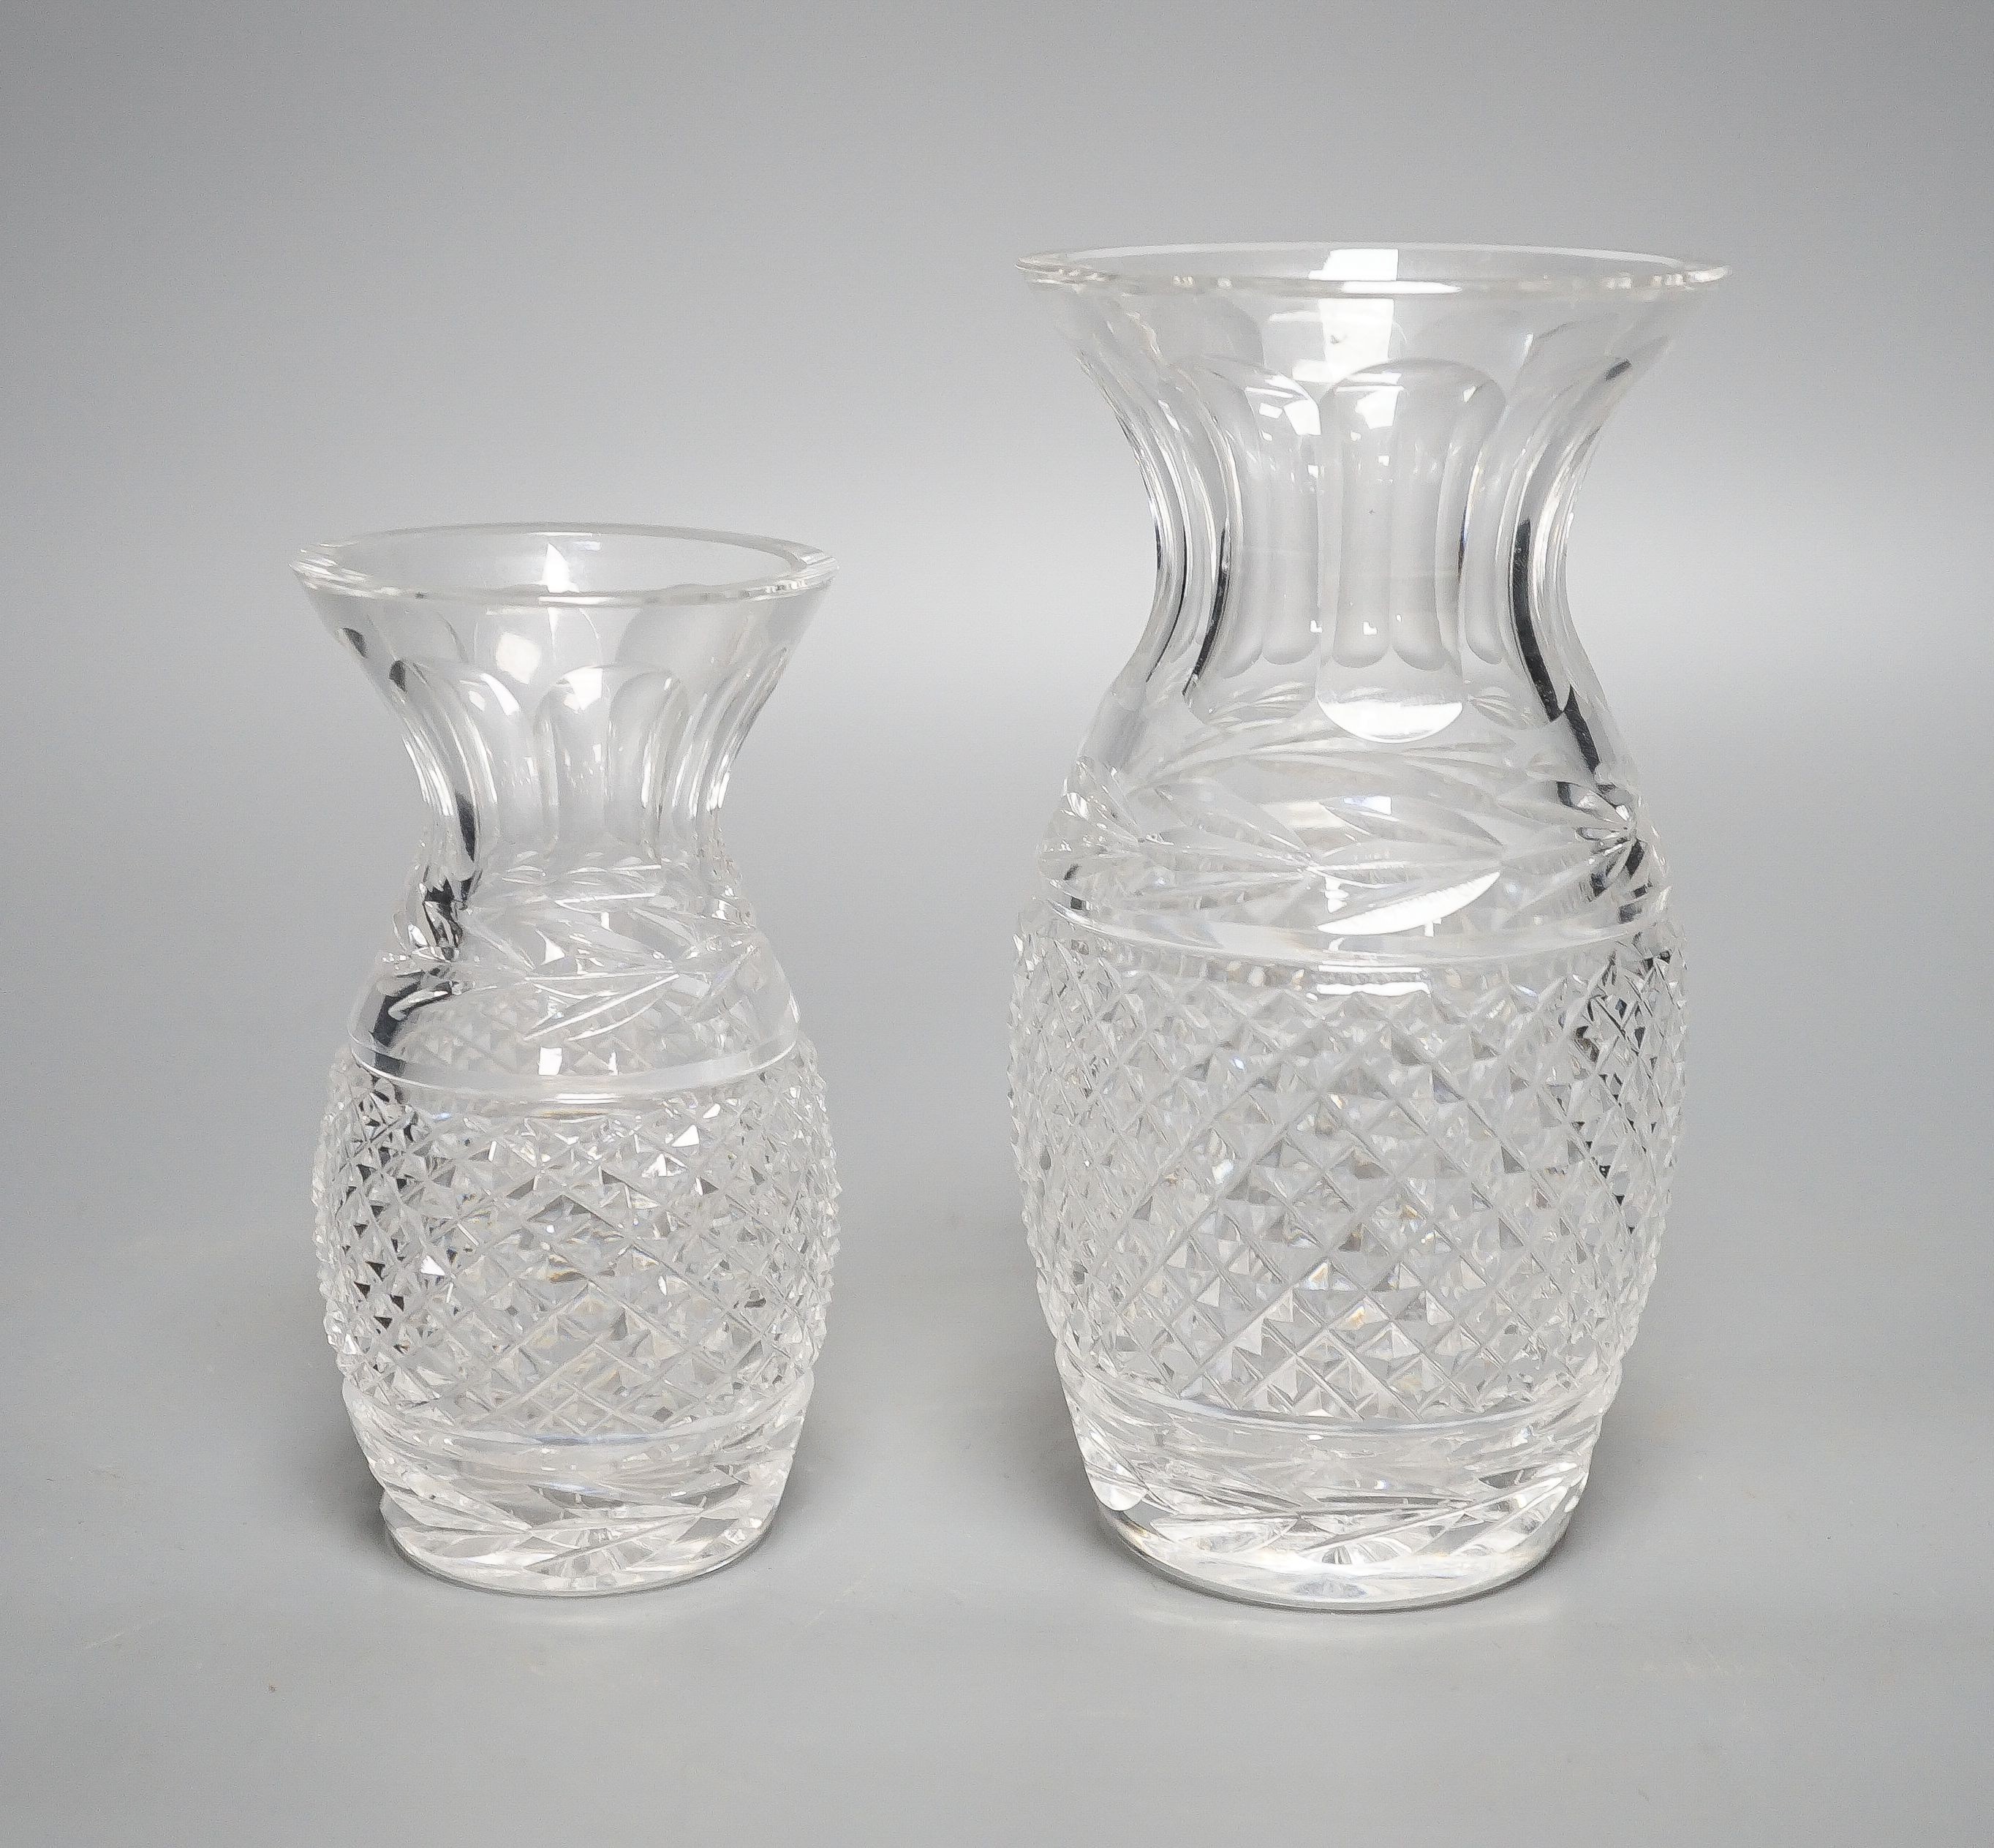 Two Waterford cut glass vases 18cm